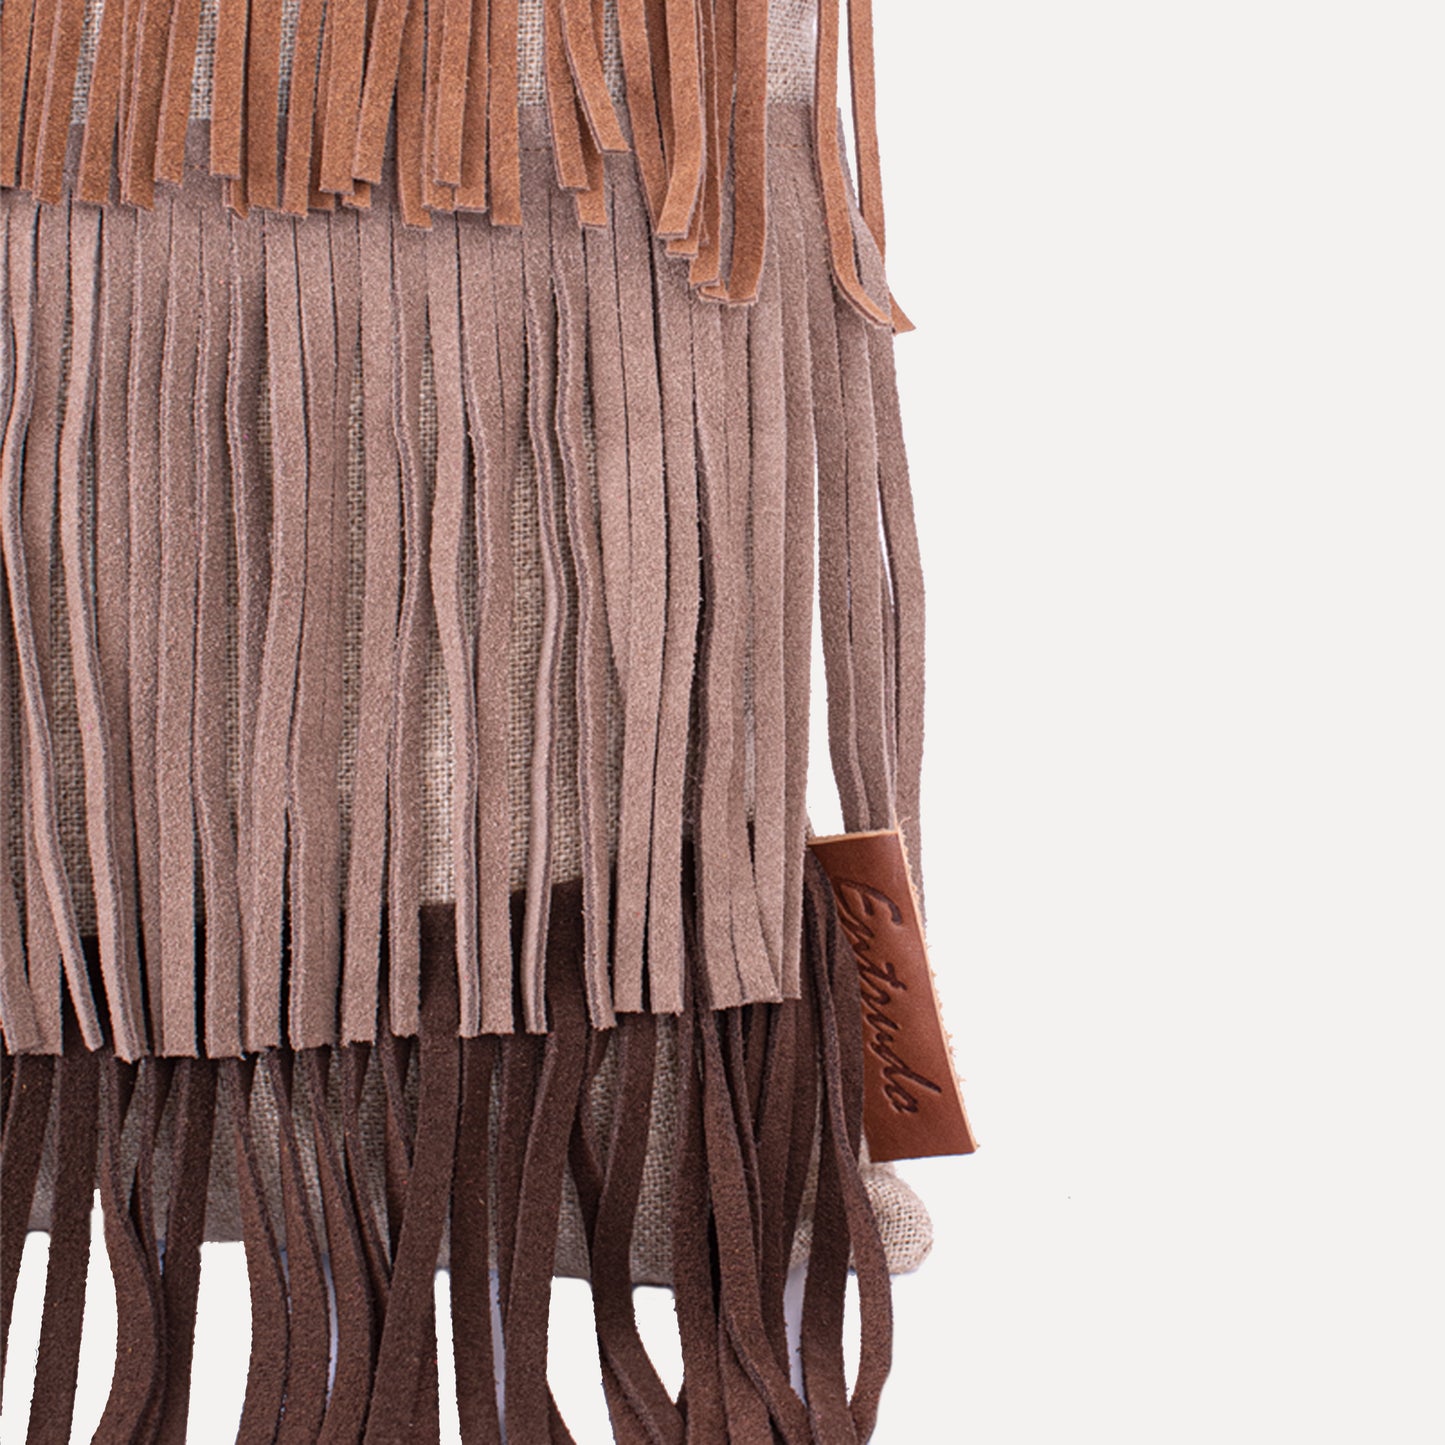 Lazarim - cushion with leather fringes in chocolate brown